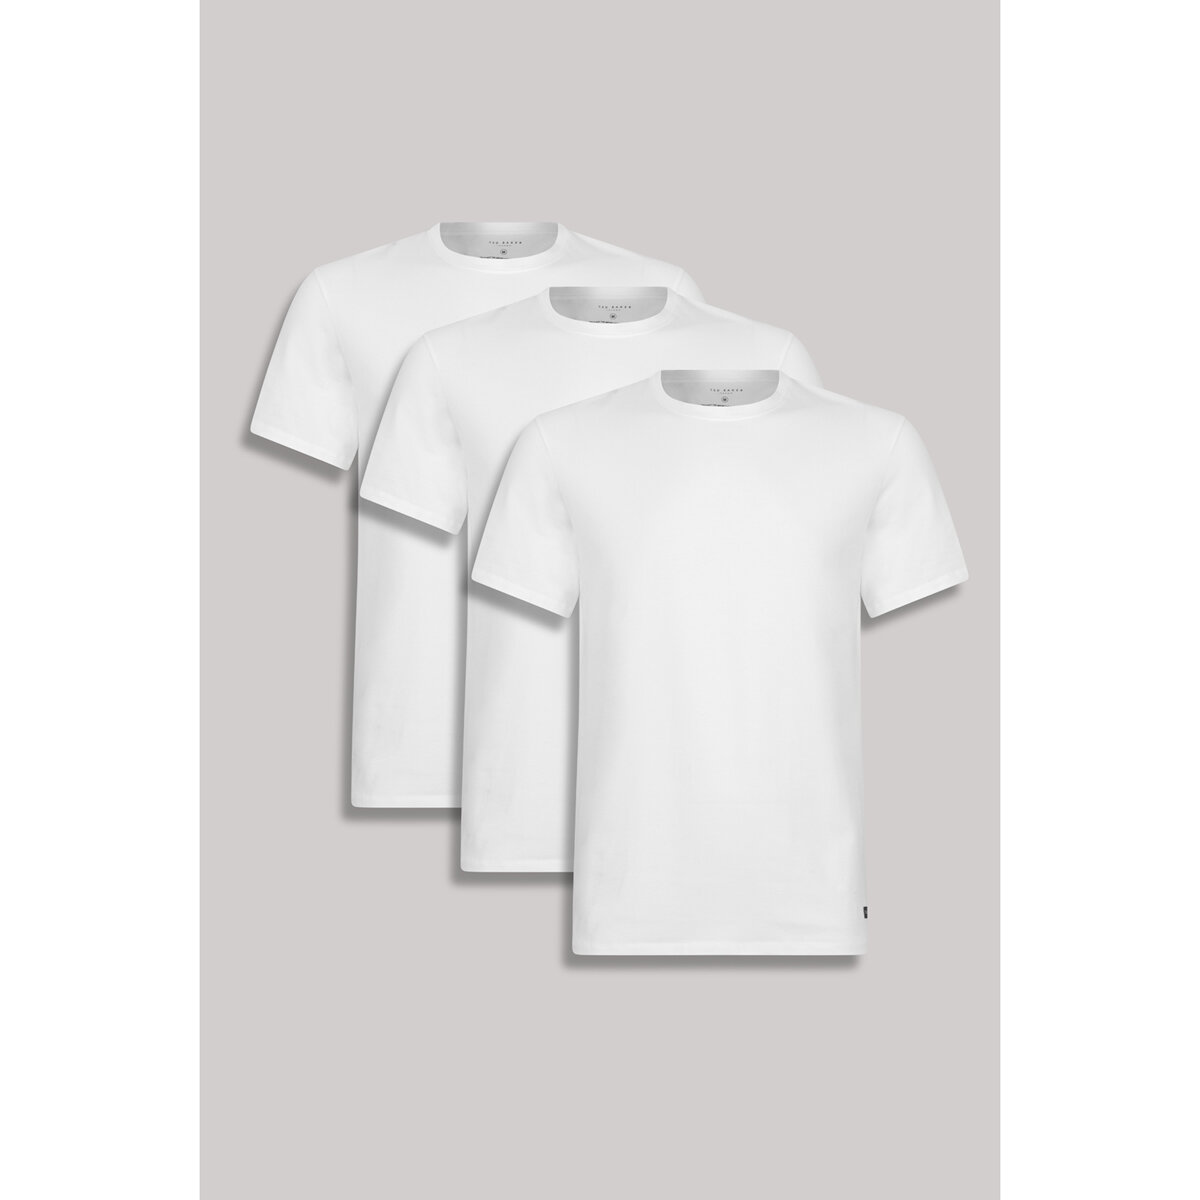 Ted Baker Men's T-Shirt, 3 Pack in 2 Colours | Costco UK